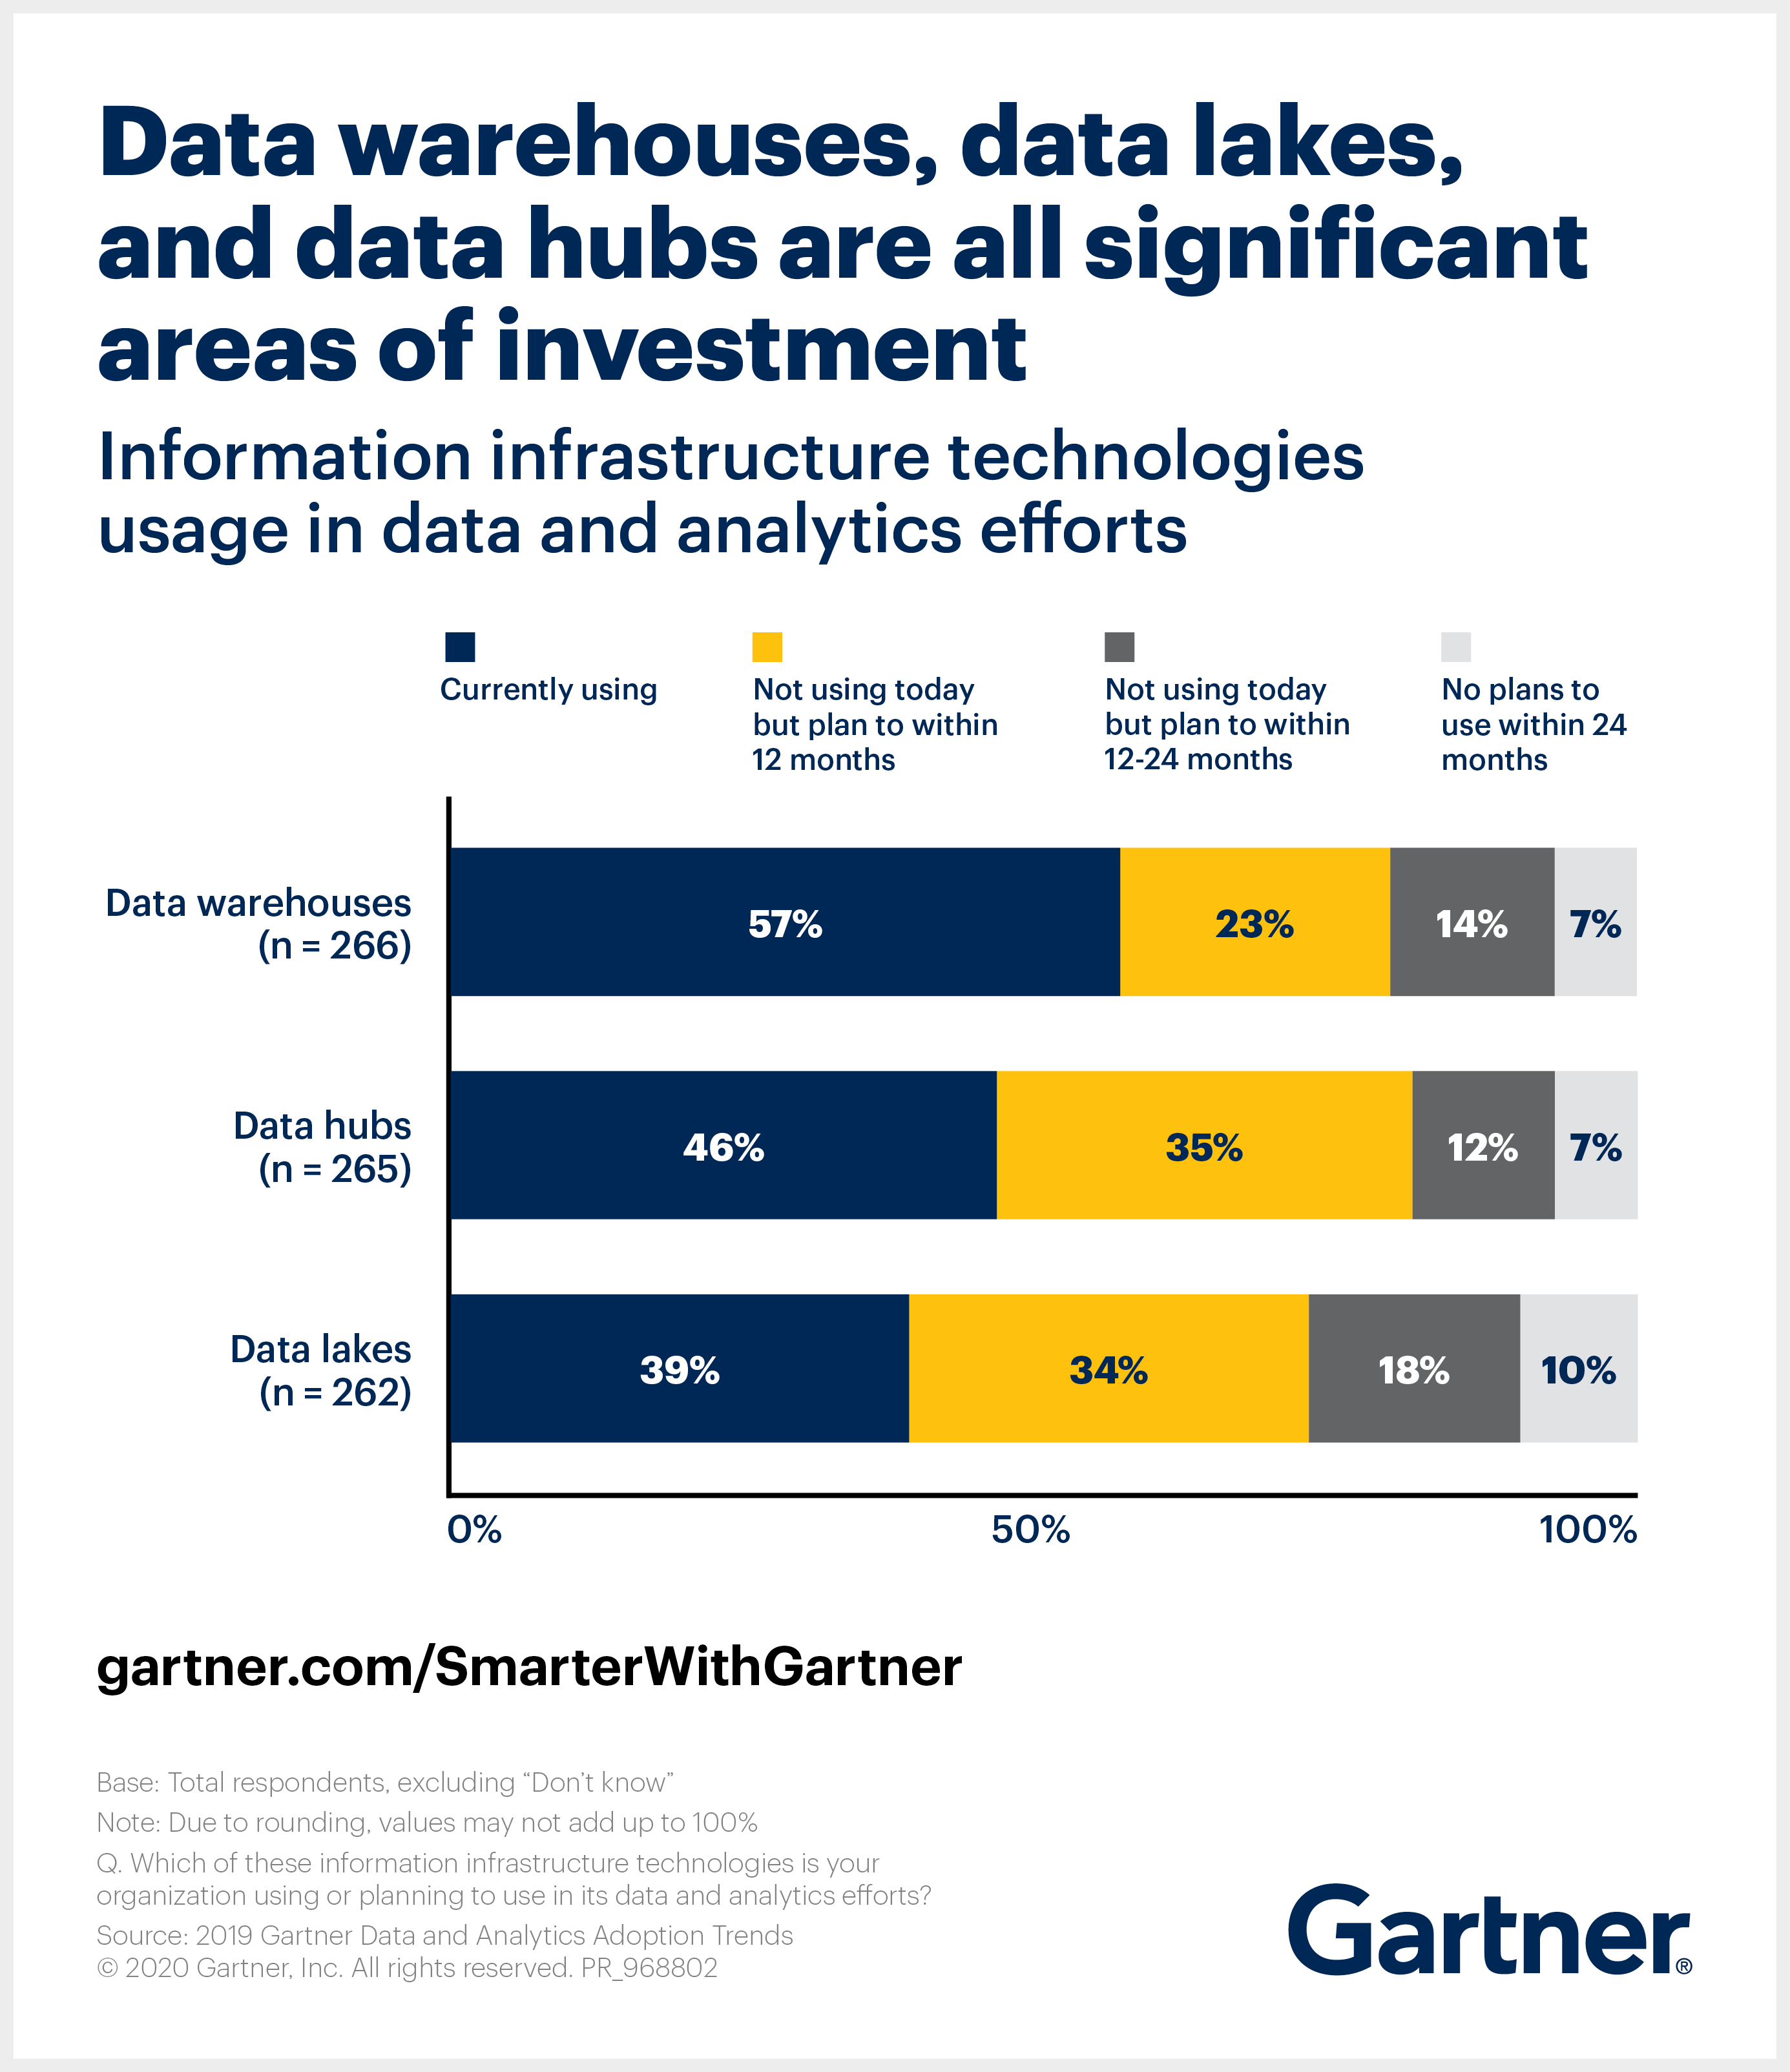 Gartner shows ways in which data warehouses, data lakes and data hubs are all significant areas of investment and how they are used in data and analytics efforts.